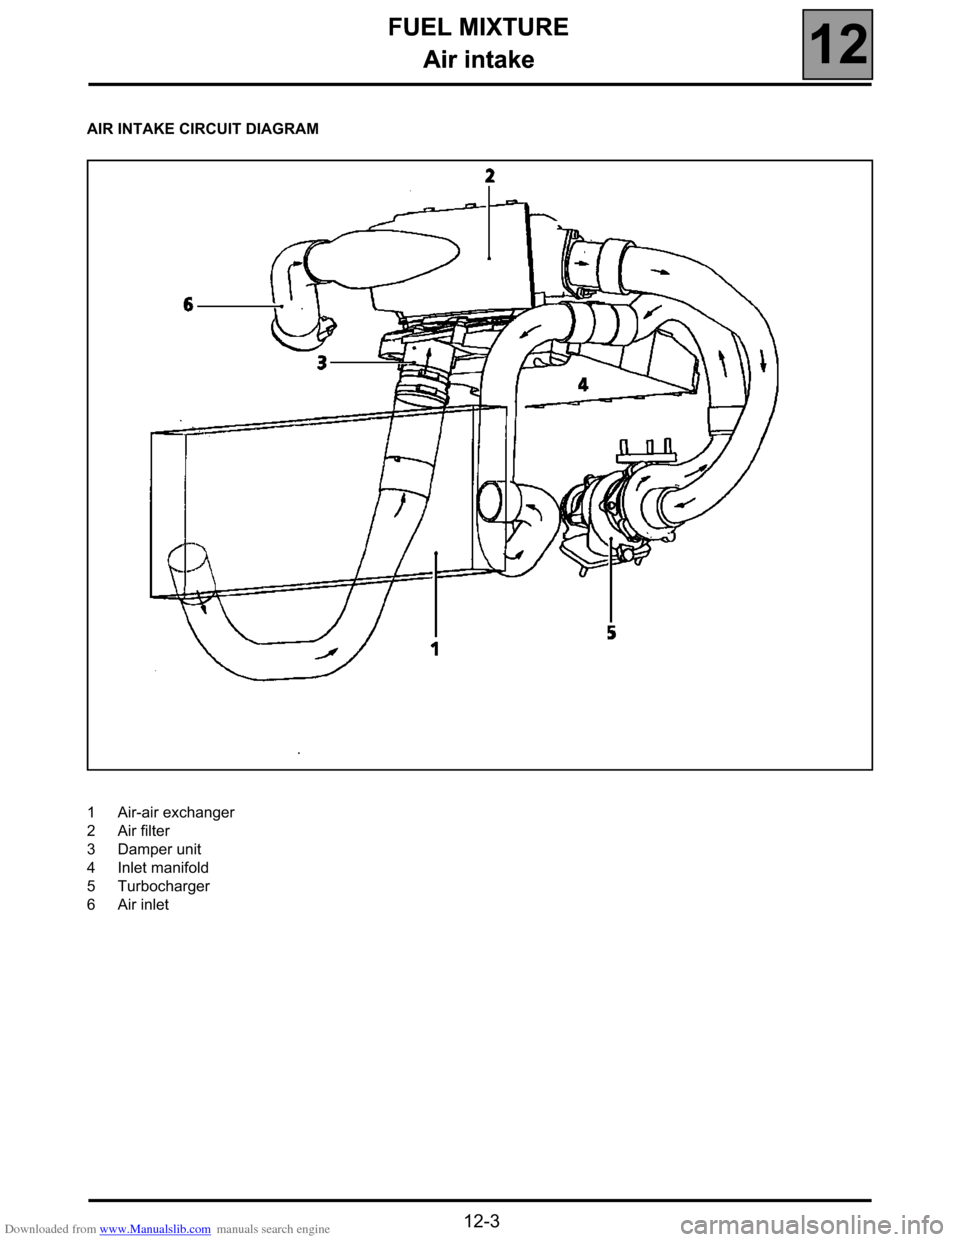 RENAULT ESPACE 2000 J66 / 3.G Technical Note 3426A Owners Manual Downloaded from www.Manualslib.com manuals search engine FUEL MIXTURE
Air intake
12
12-3
FUEL MIXTURE
Air intake
AIR INTAKE CIRCUIT DIAGRAM
1Air-air exchanger
2Air filter
3Damper unit
4Inlet manifold
